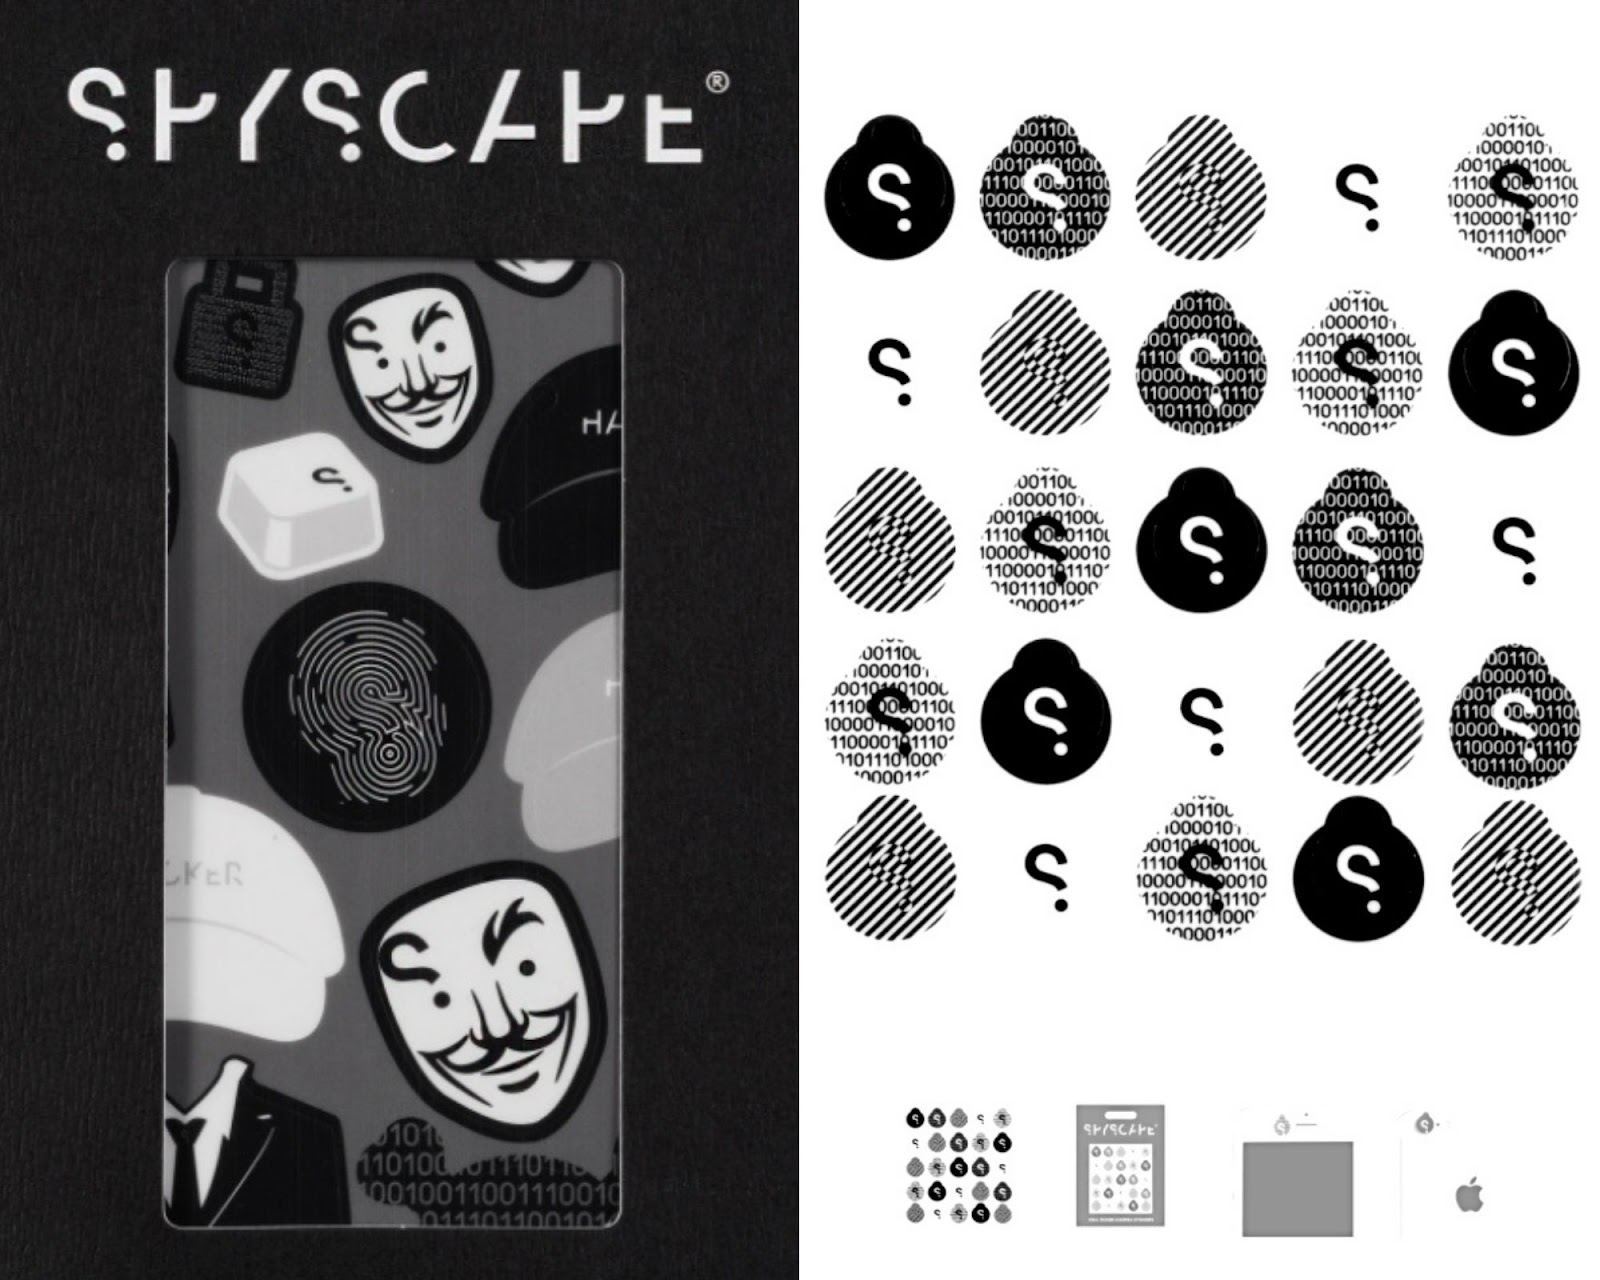 Phone decals from SPYSCAPE